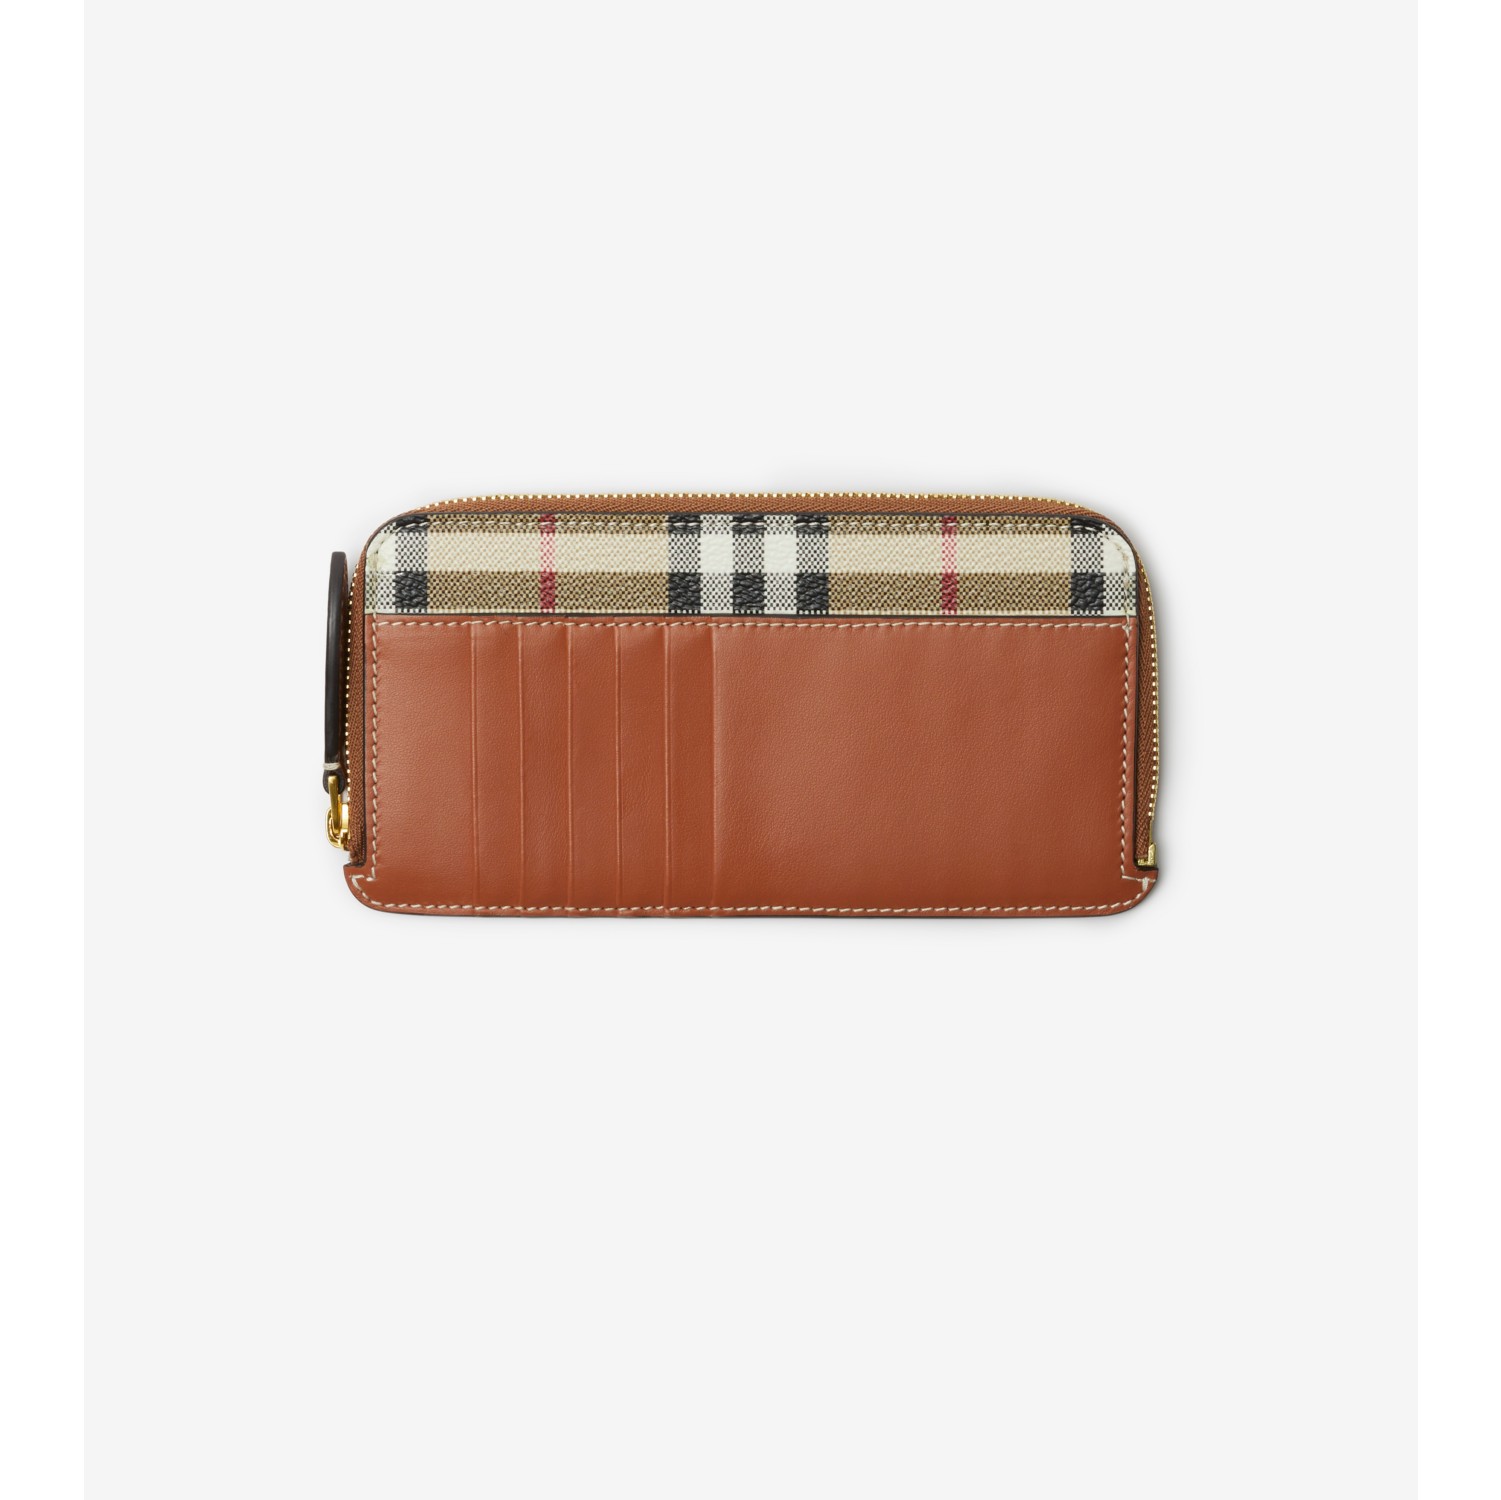 Check and Leather Zip Card Case in Archive Beige - Women